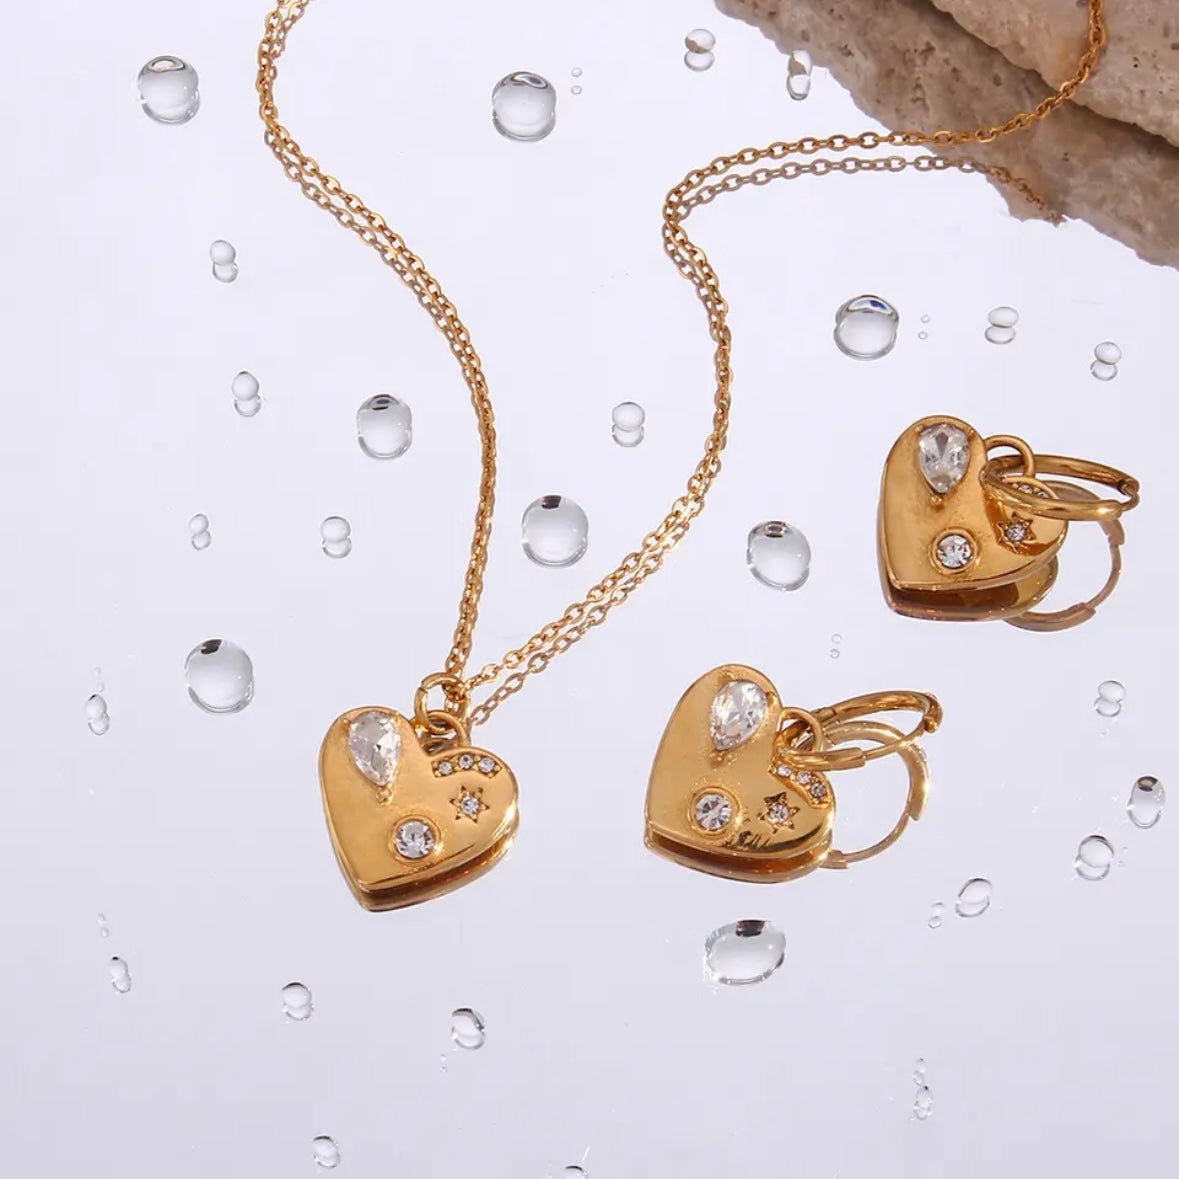 gold heart charm necklace and earrings set, Sydney australia 